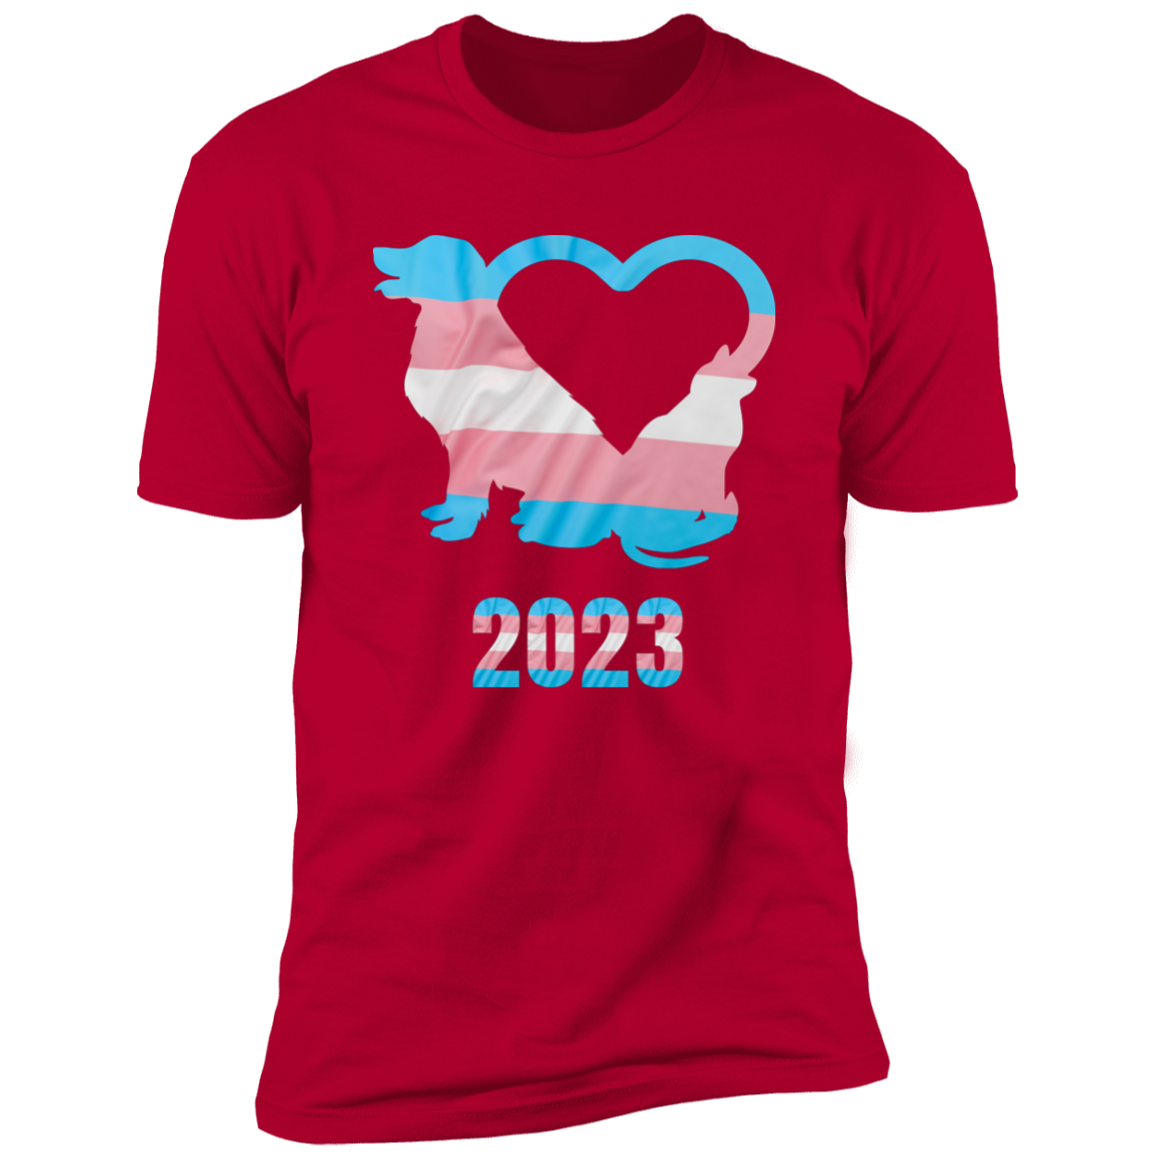 Trans Pride Dog & Cat Heart Pride T-shirt, Trans Pride Dog & Cat Shirt for humans, in red